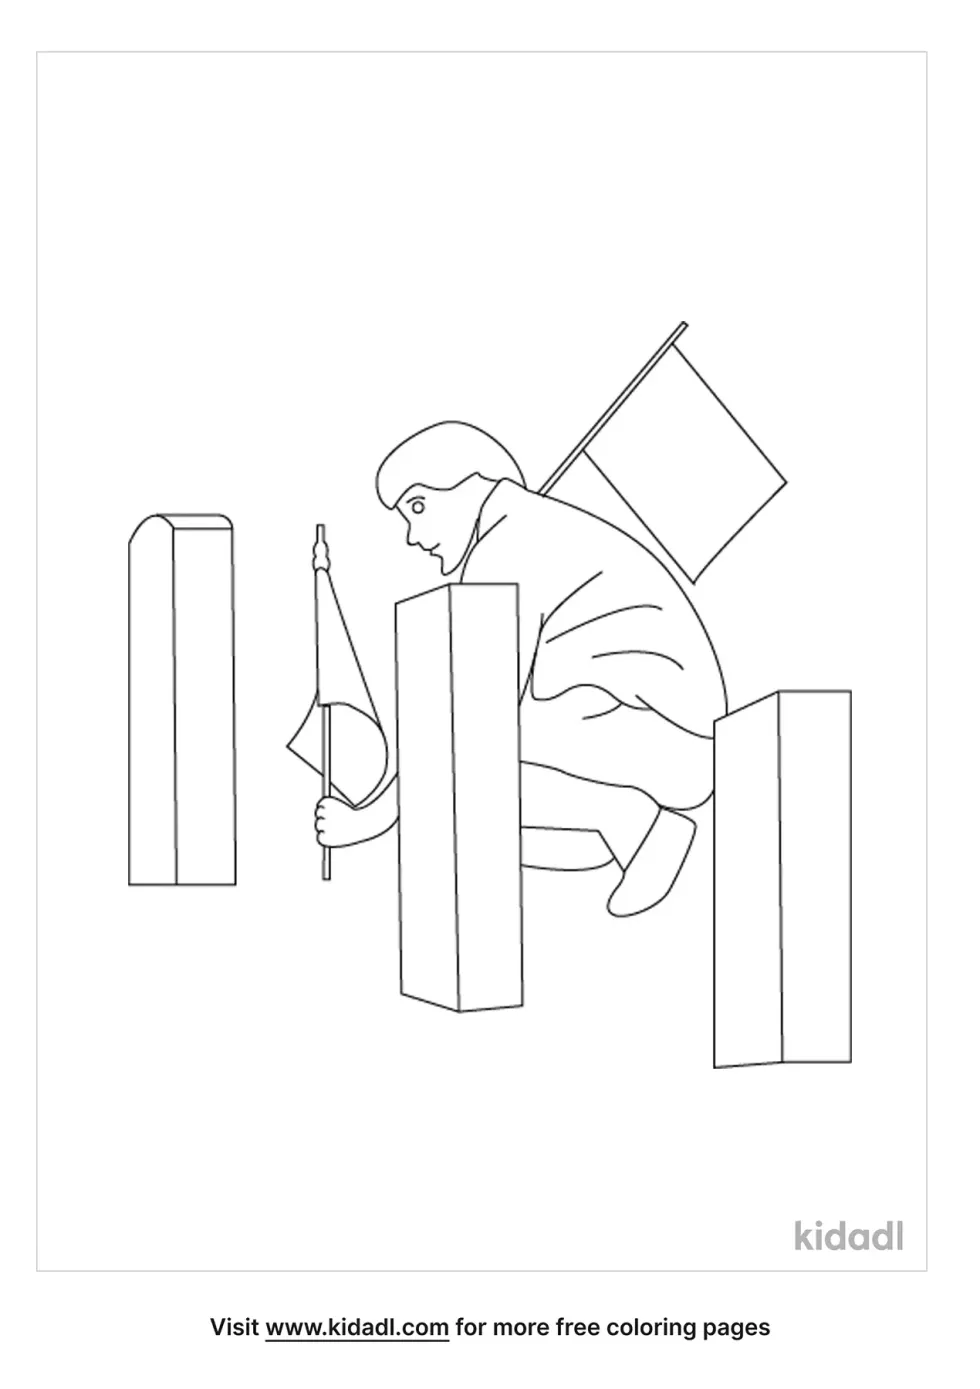 The Boy Puts The Flag On Graveyard Coloring Page